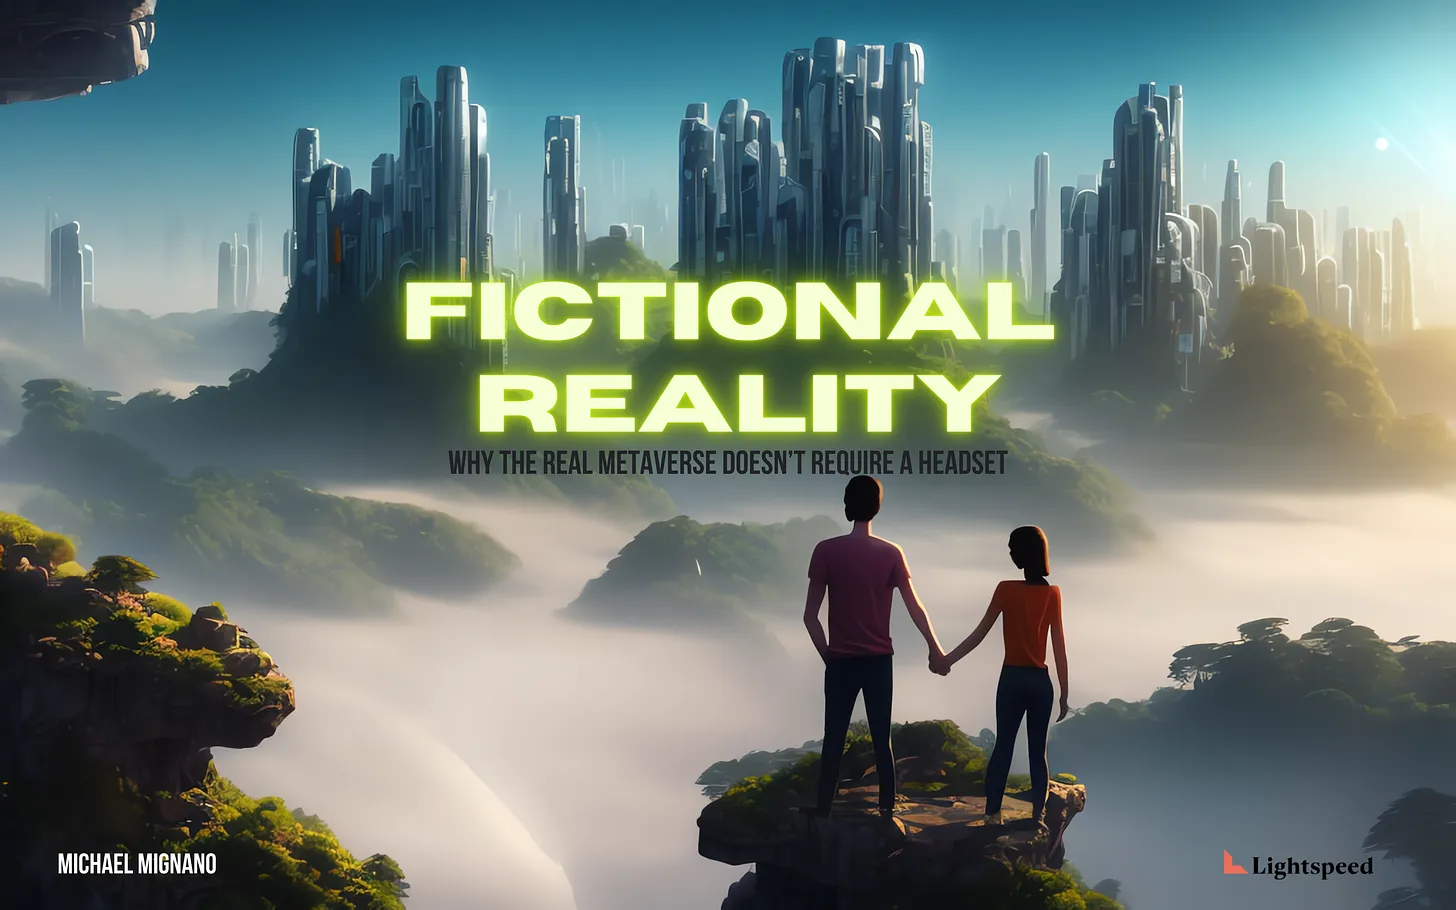 Fictional Reality: Why the Real Metaverse Doesn't Require a Headset